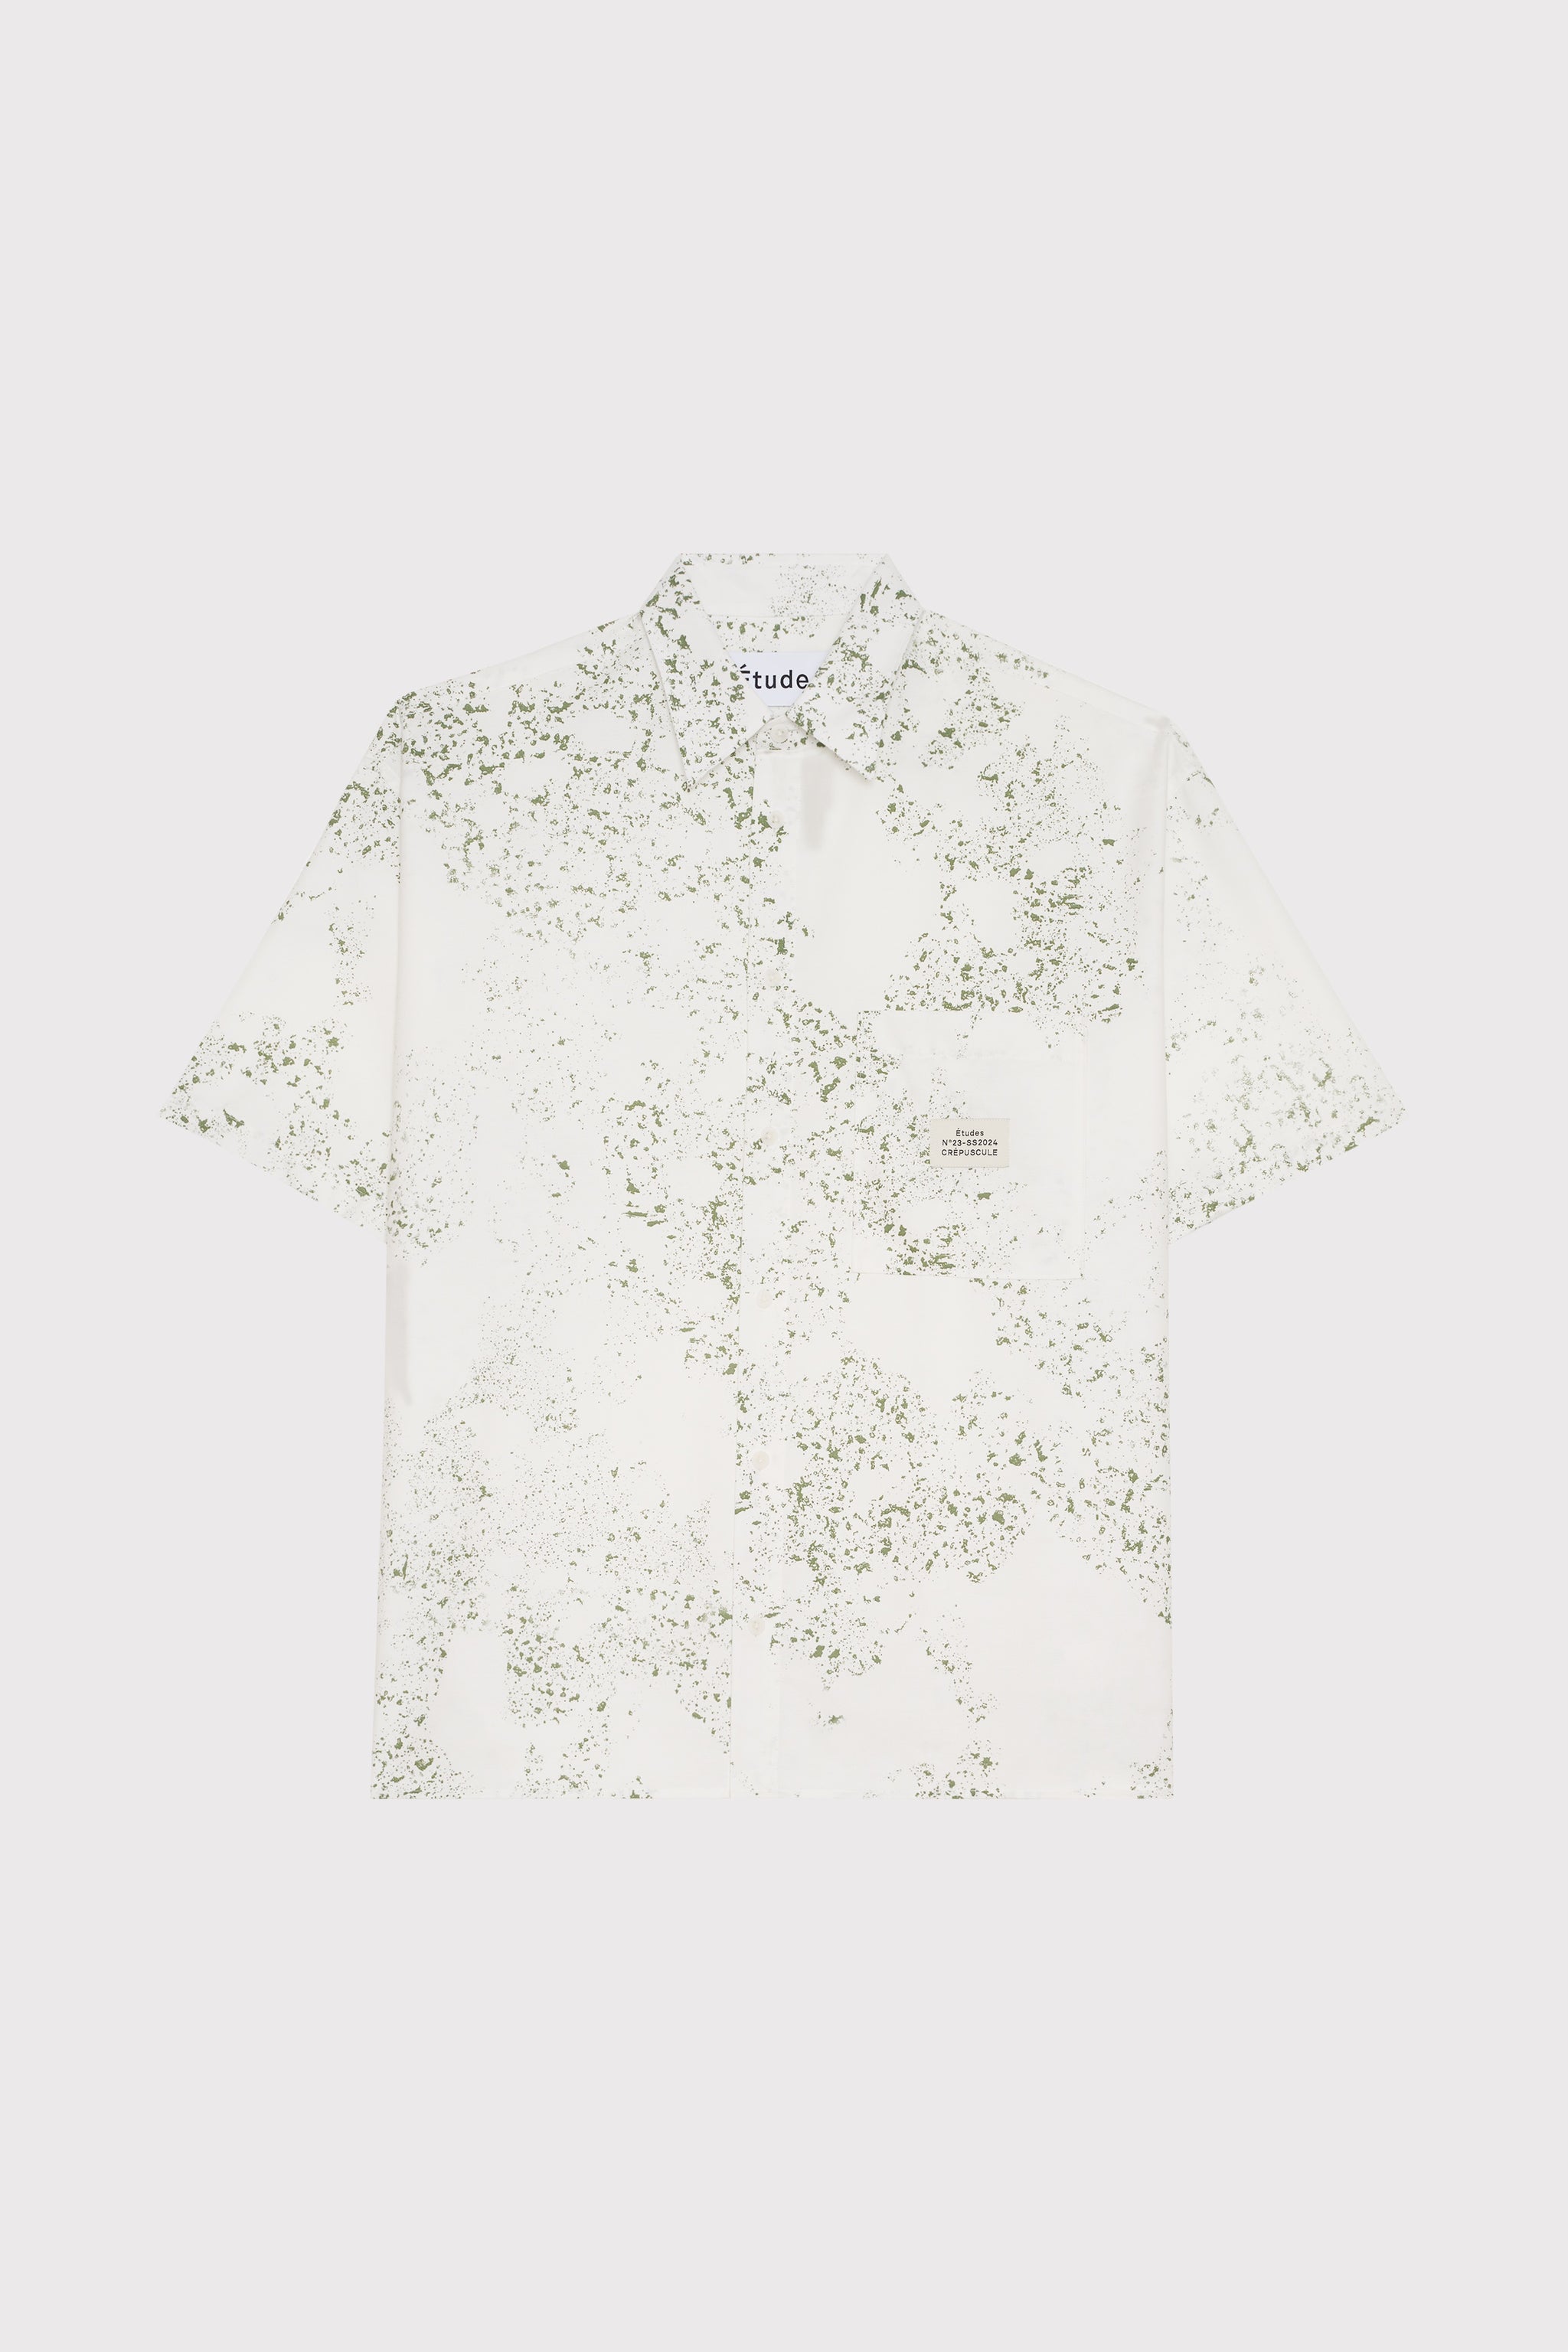  Short SLeeve Illusion Canvas All Drips by etudes studio